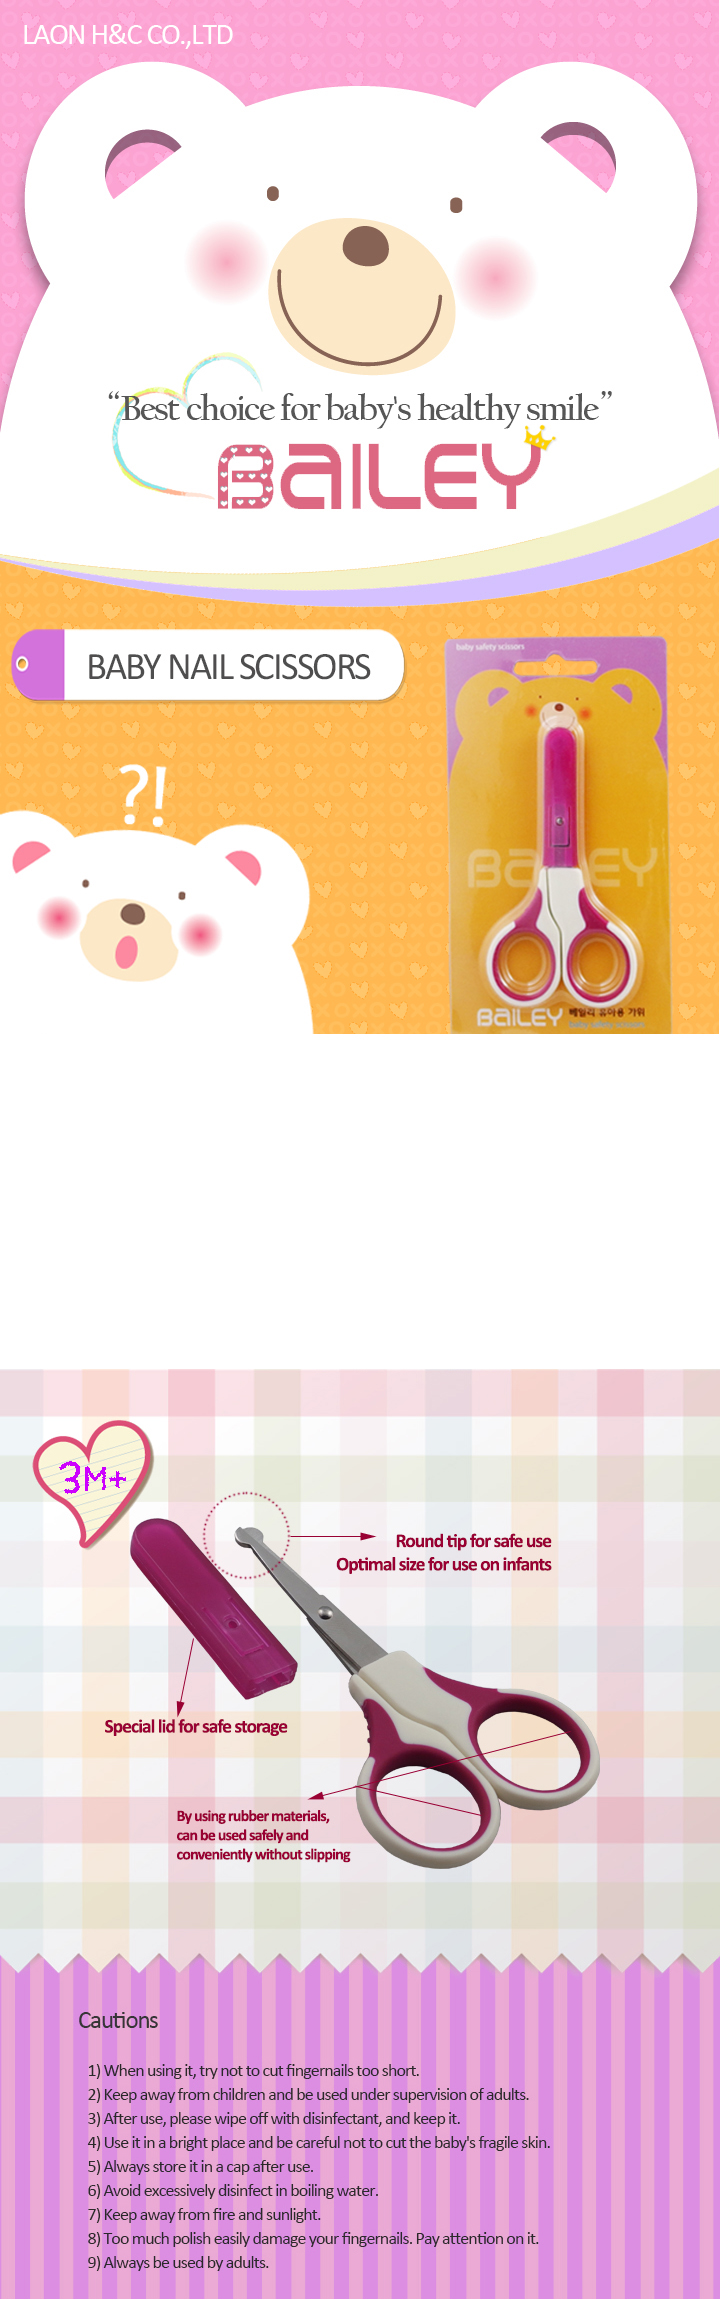 Bailey Baby Nail Scissors (3+ months)